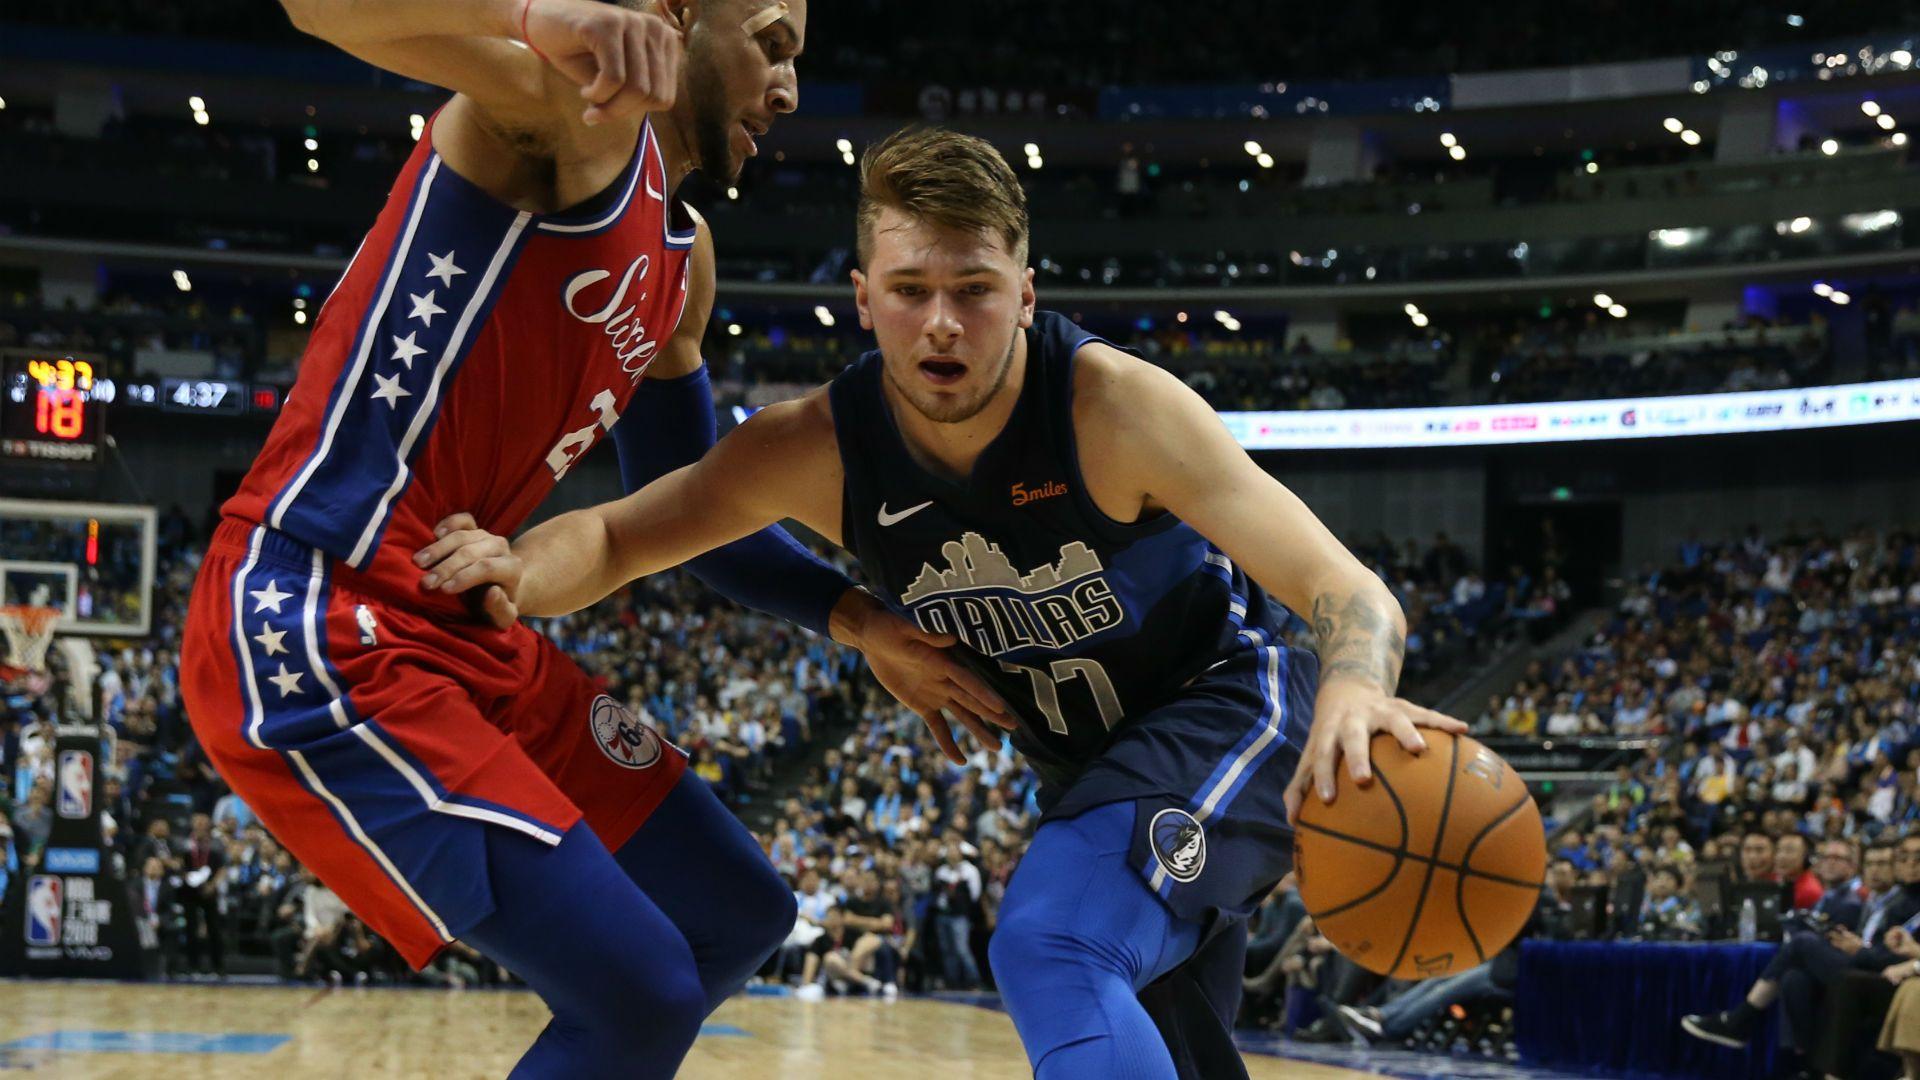 Luka Doncic is next in line among the most anticipated international